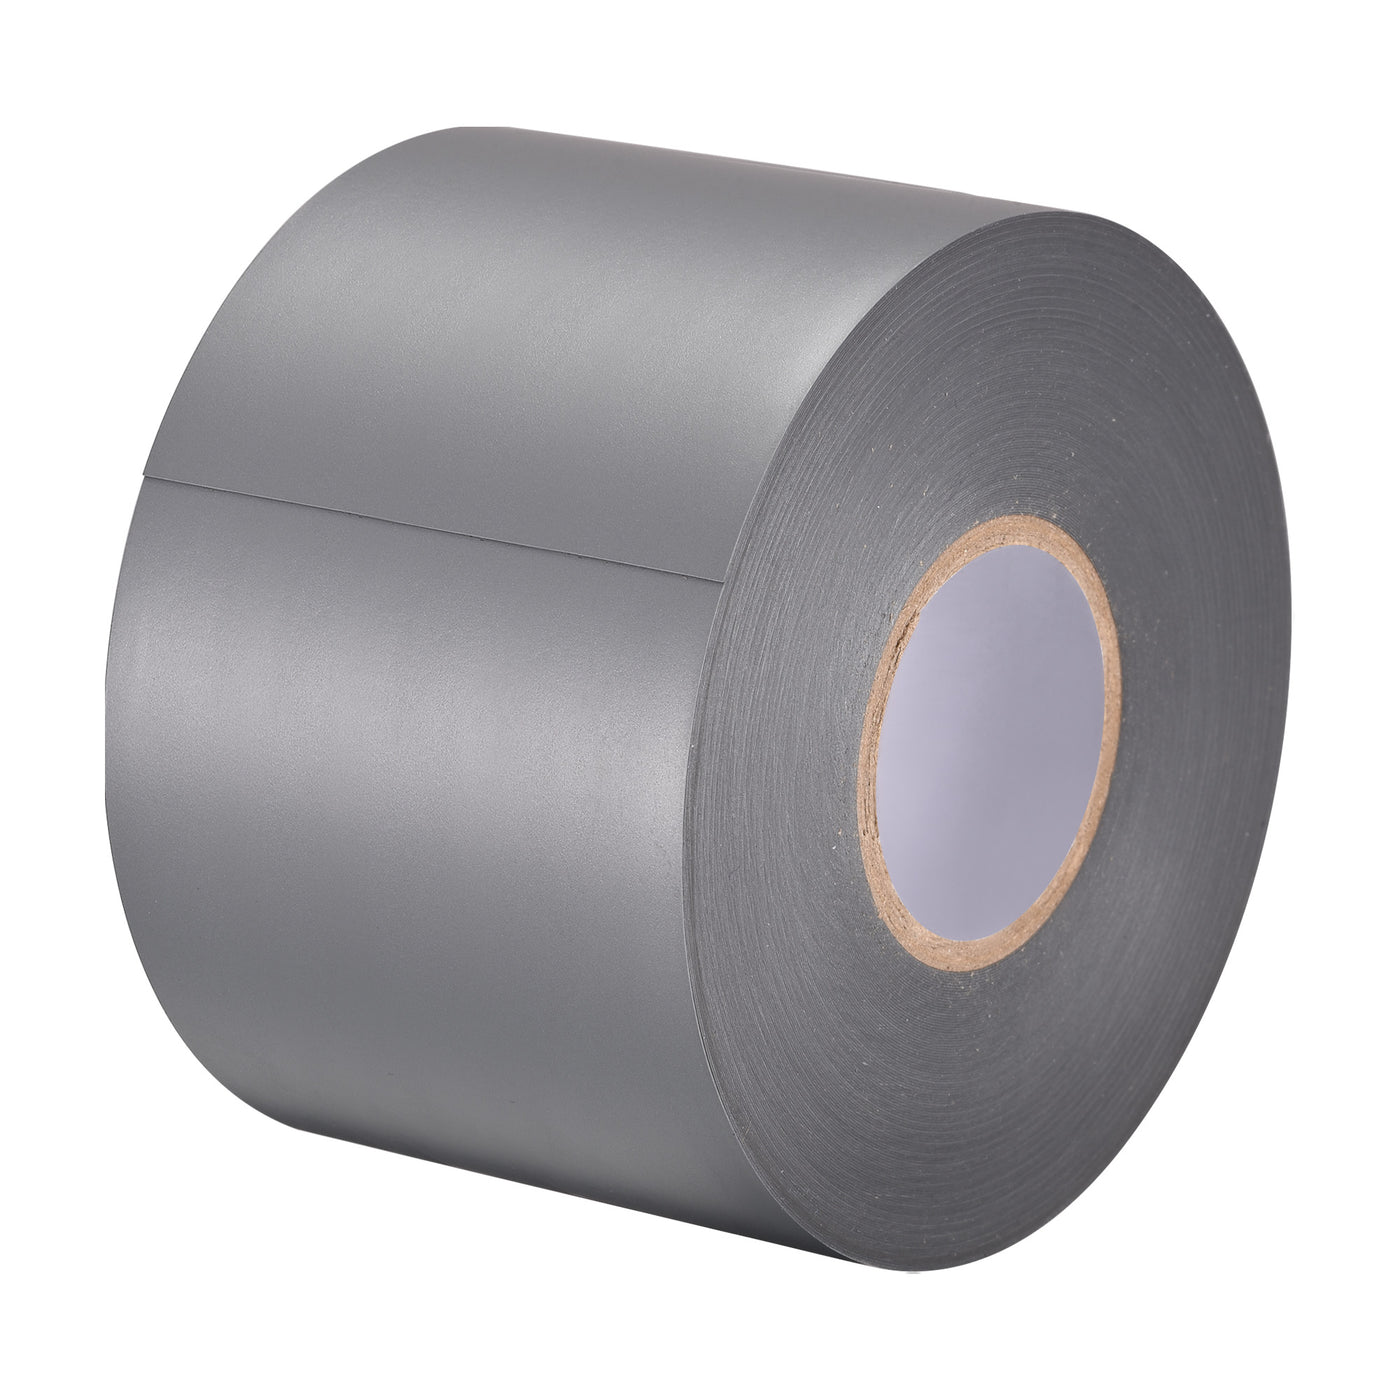 uxcell Uxcell Insulating Tape 80mm Width 26M Long 0.26mm Thick PVC Electrical Tape Grey